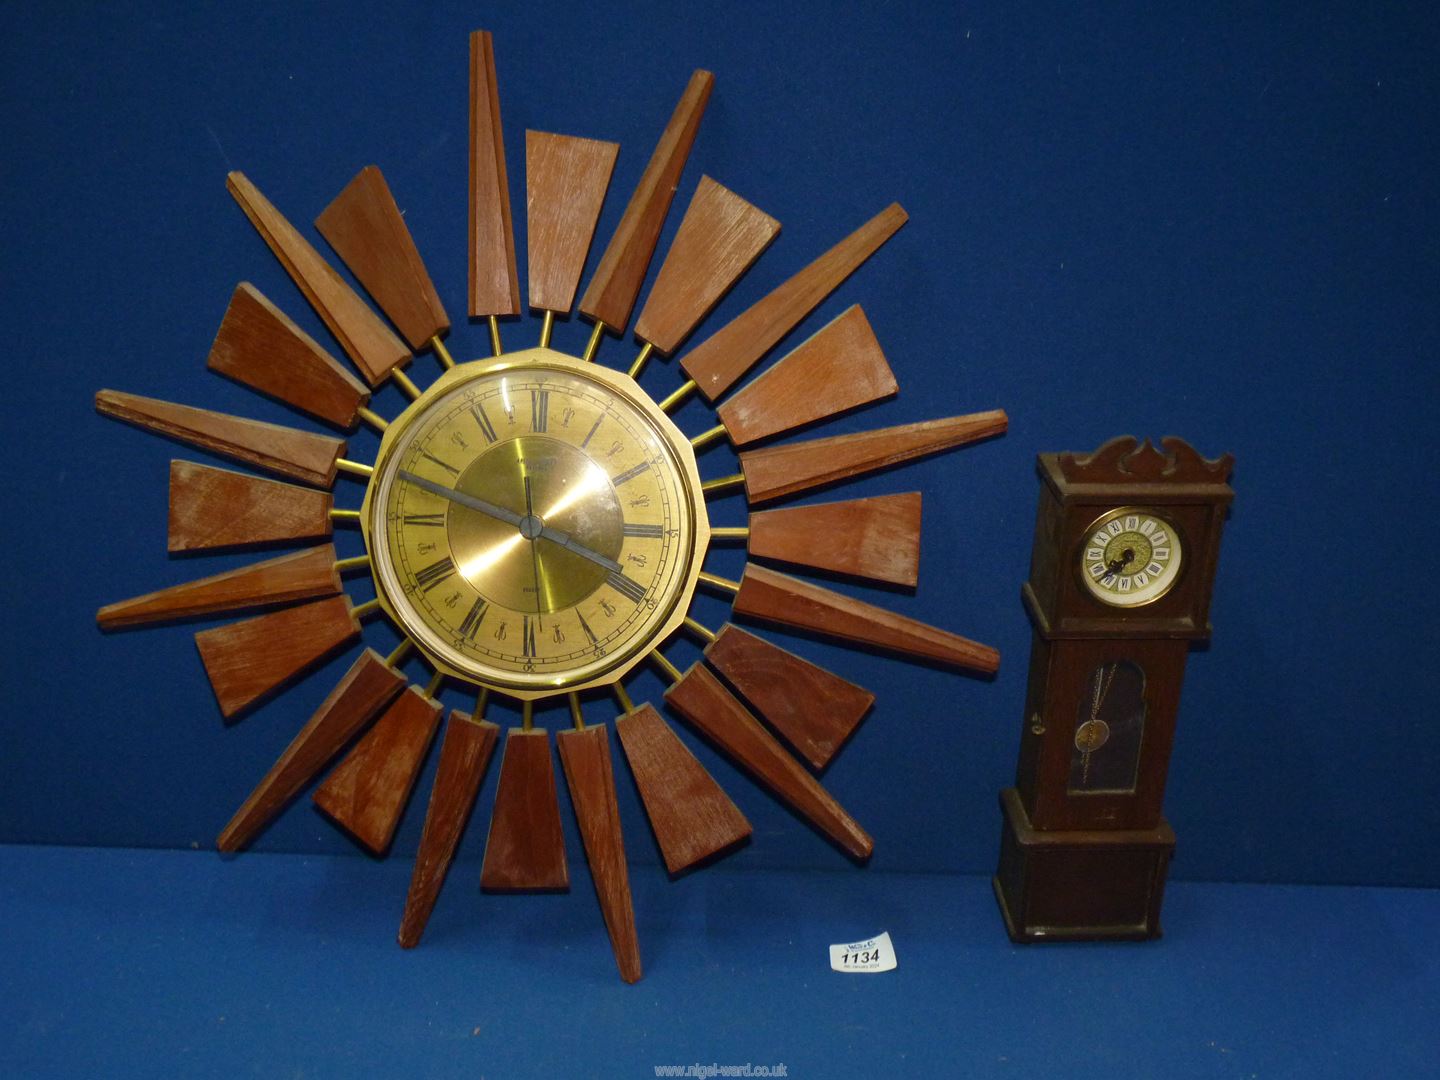 An Anstey Wilson battery Sunburst wall clock and a Mercedes clock in the form of a miniature